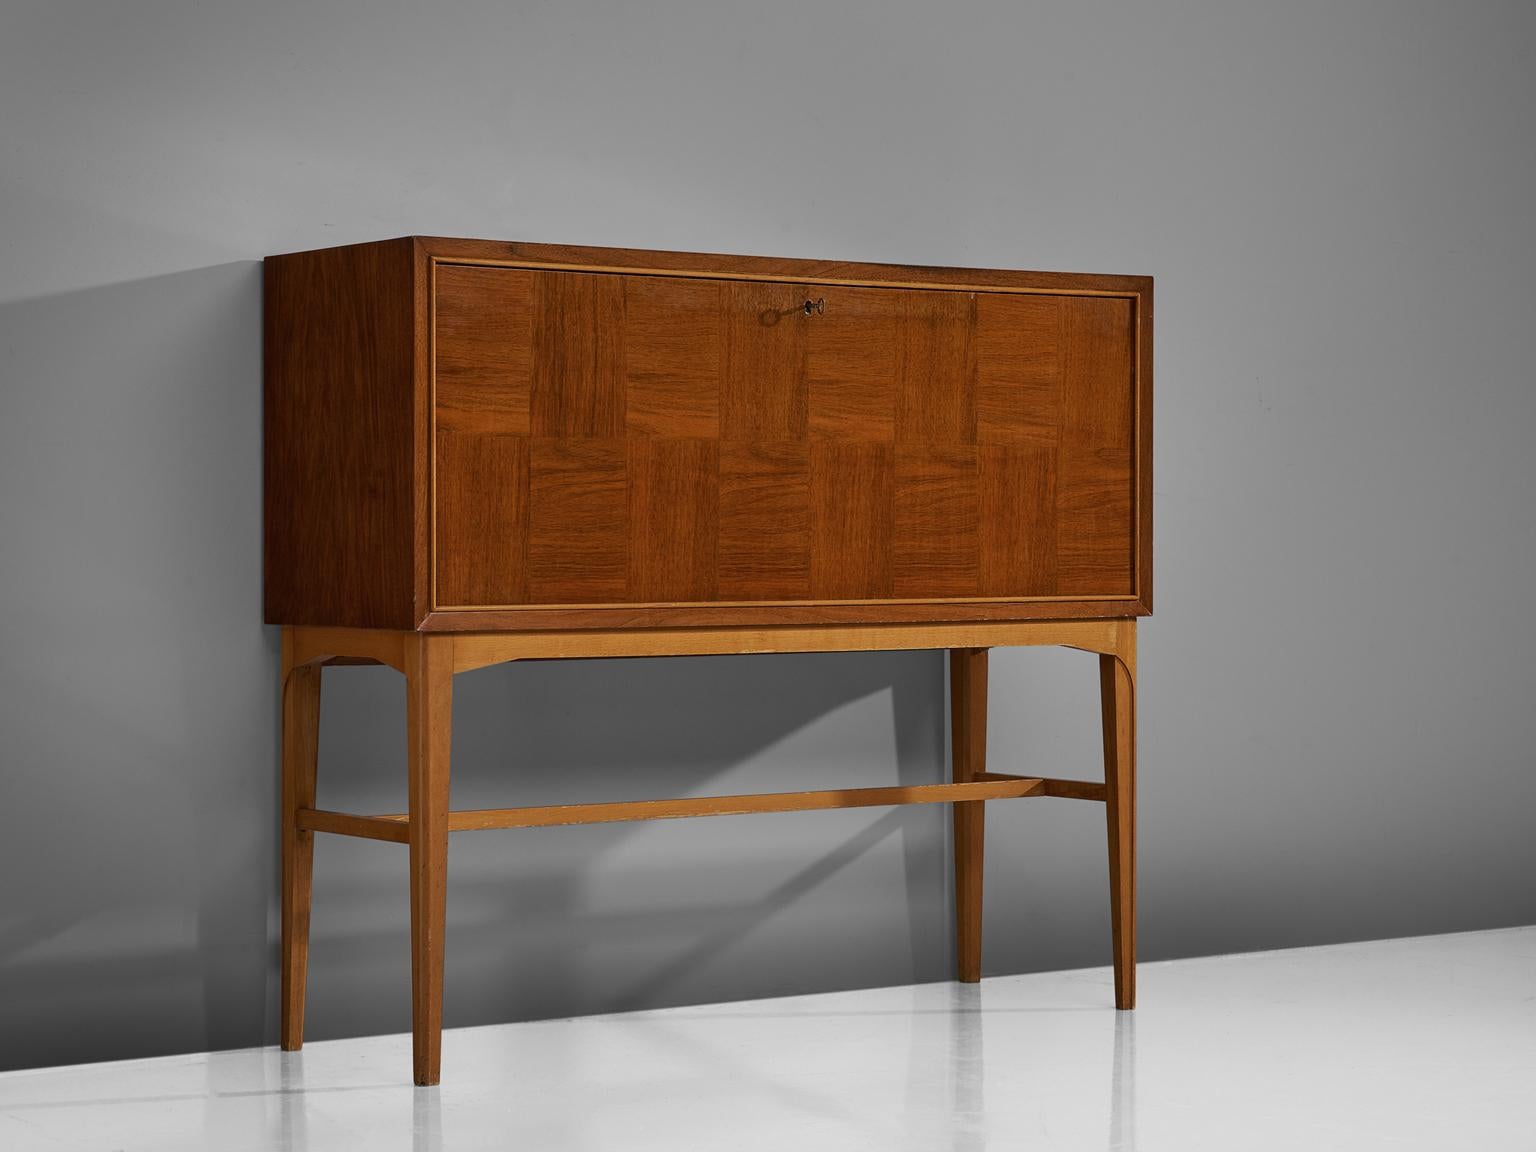 Carl Axel Acking for Bodafors, dry bar and sideboard, teak and beech, Sweden, 1950s.

This sculptural and refined liquor bar is well-made and features a checked front. The legs are thin and strong and this piece can be used for different kinds of